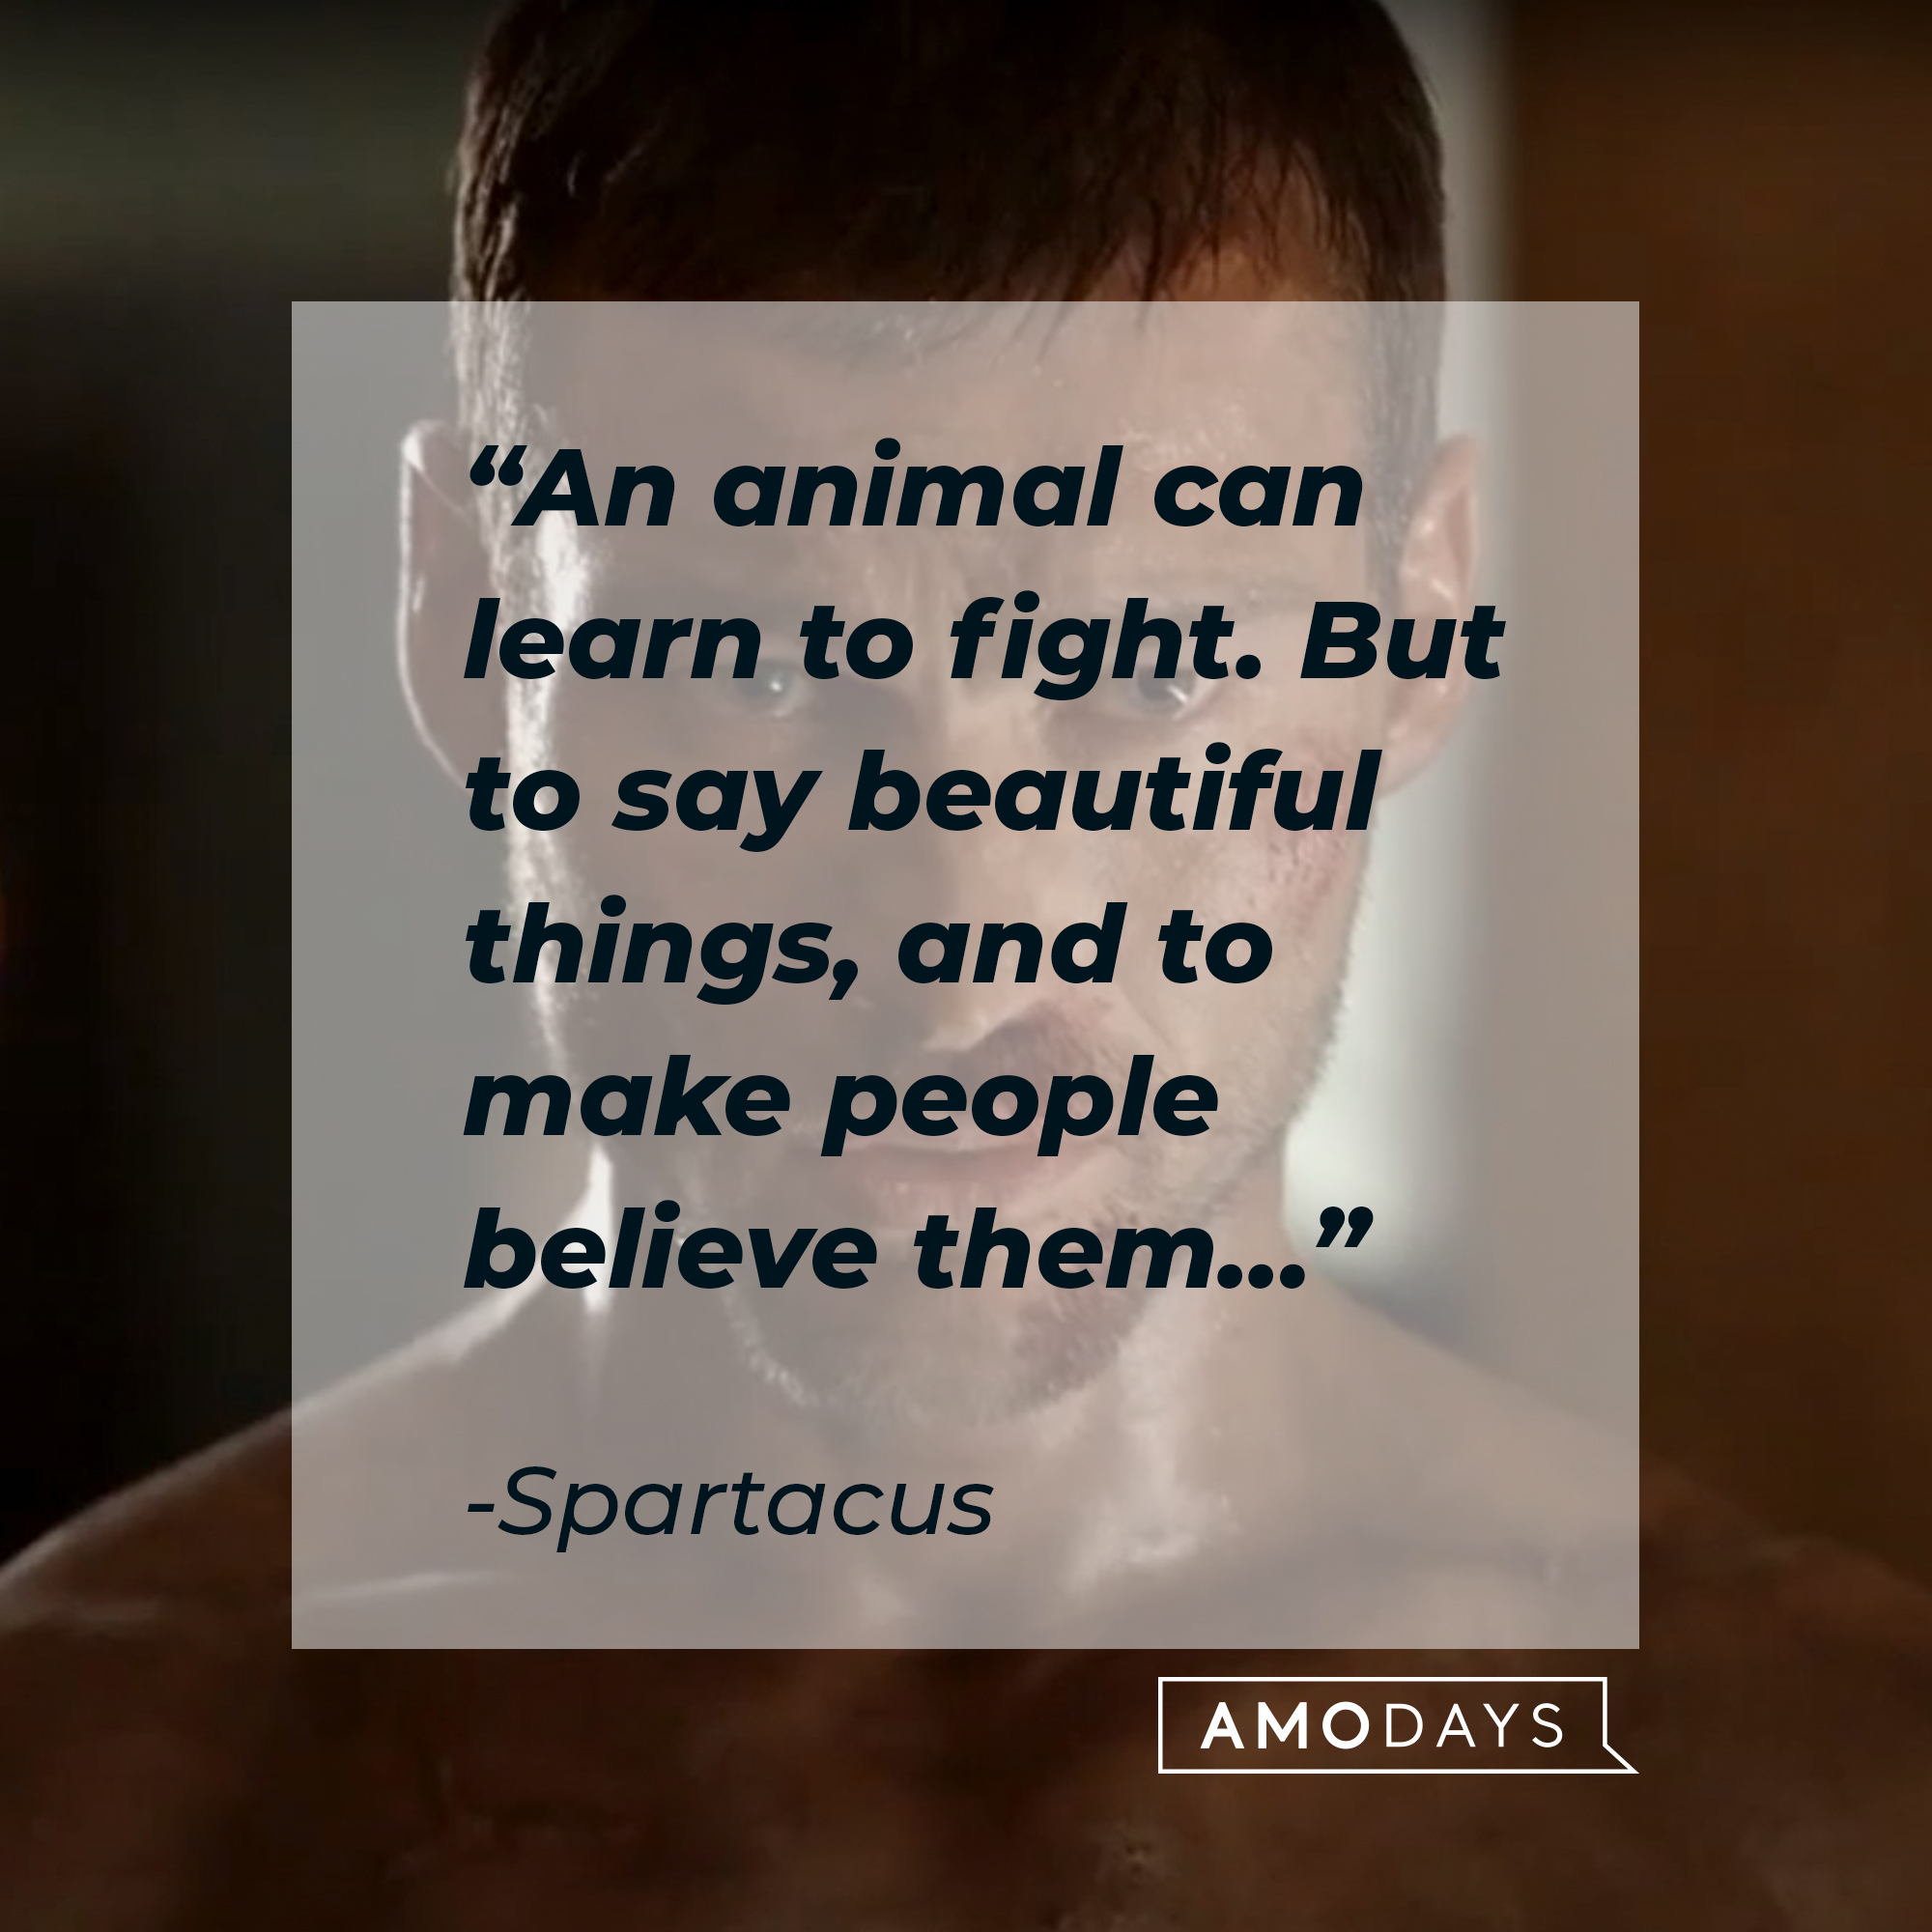 An image of the character Spartacus with his quote: “An animal can learn to fight. But to say beautiful things, and to make people believe them…” |  Source: youtube.com/Starz